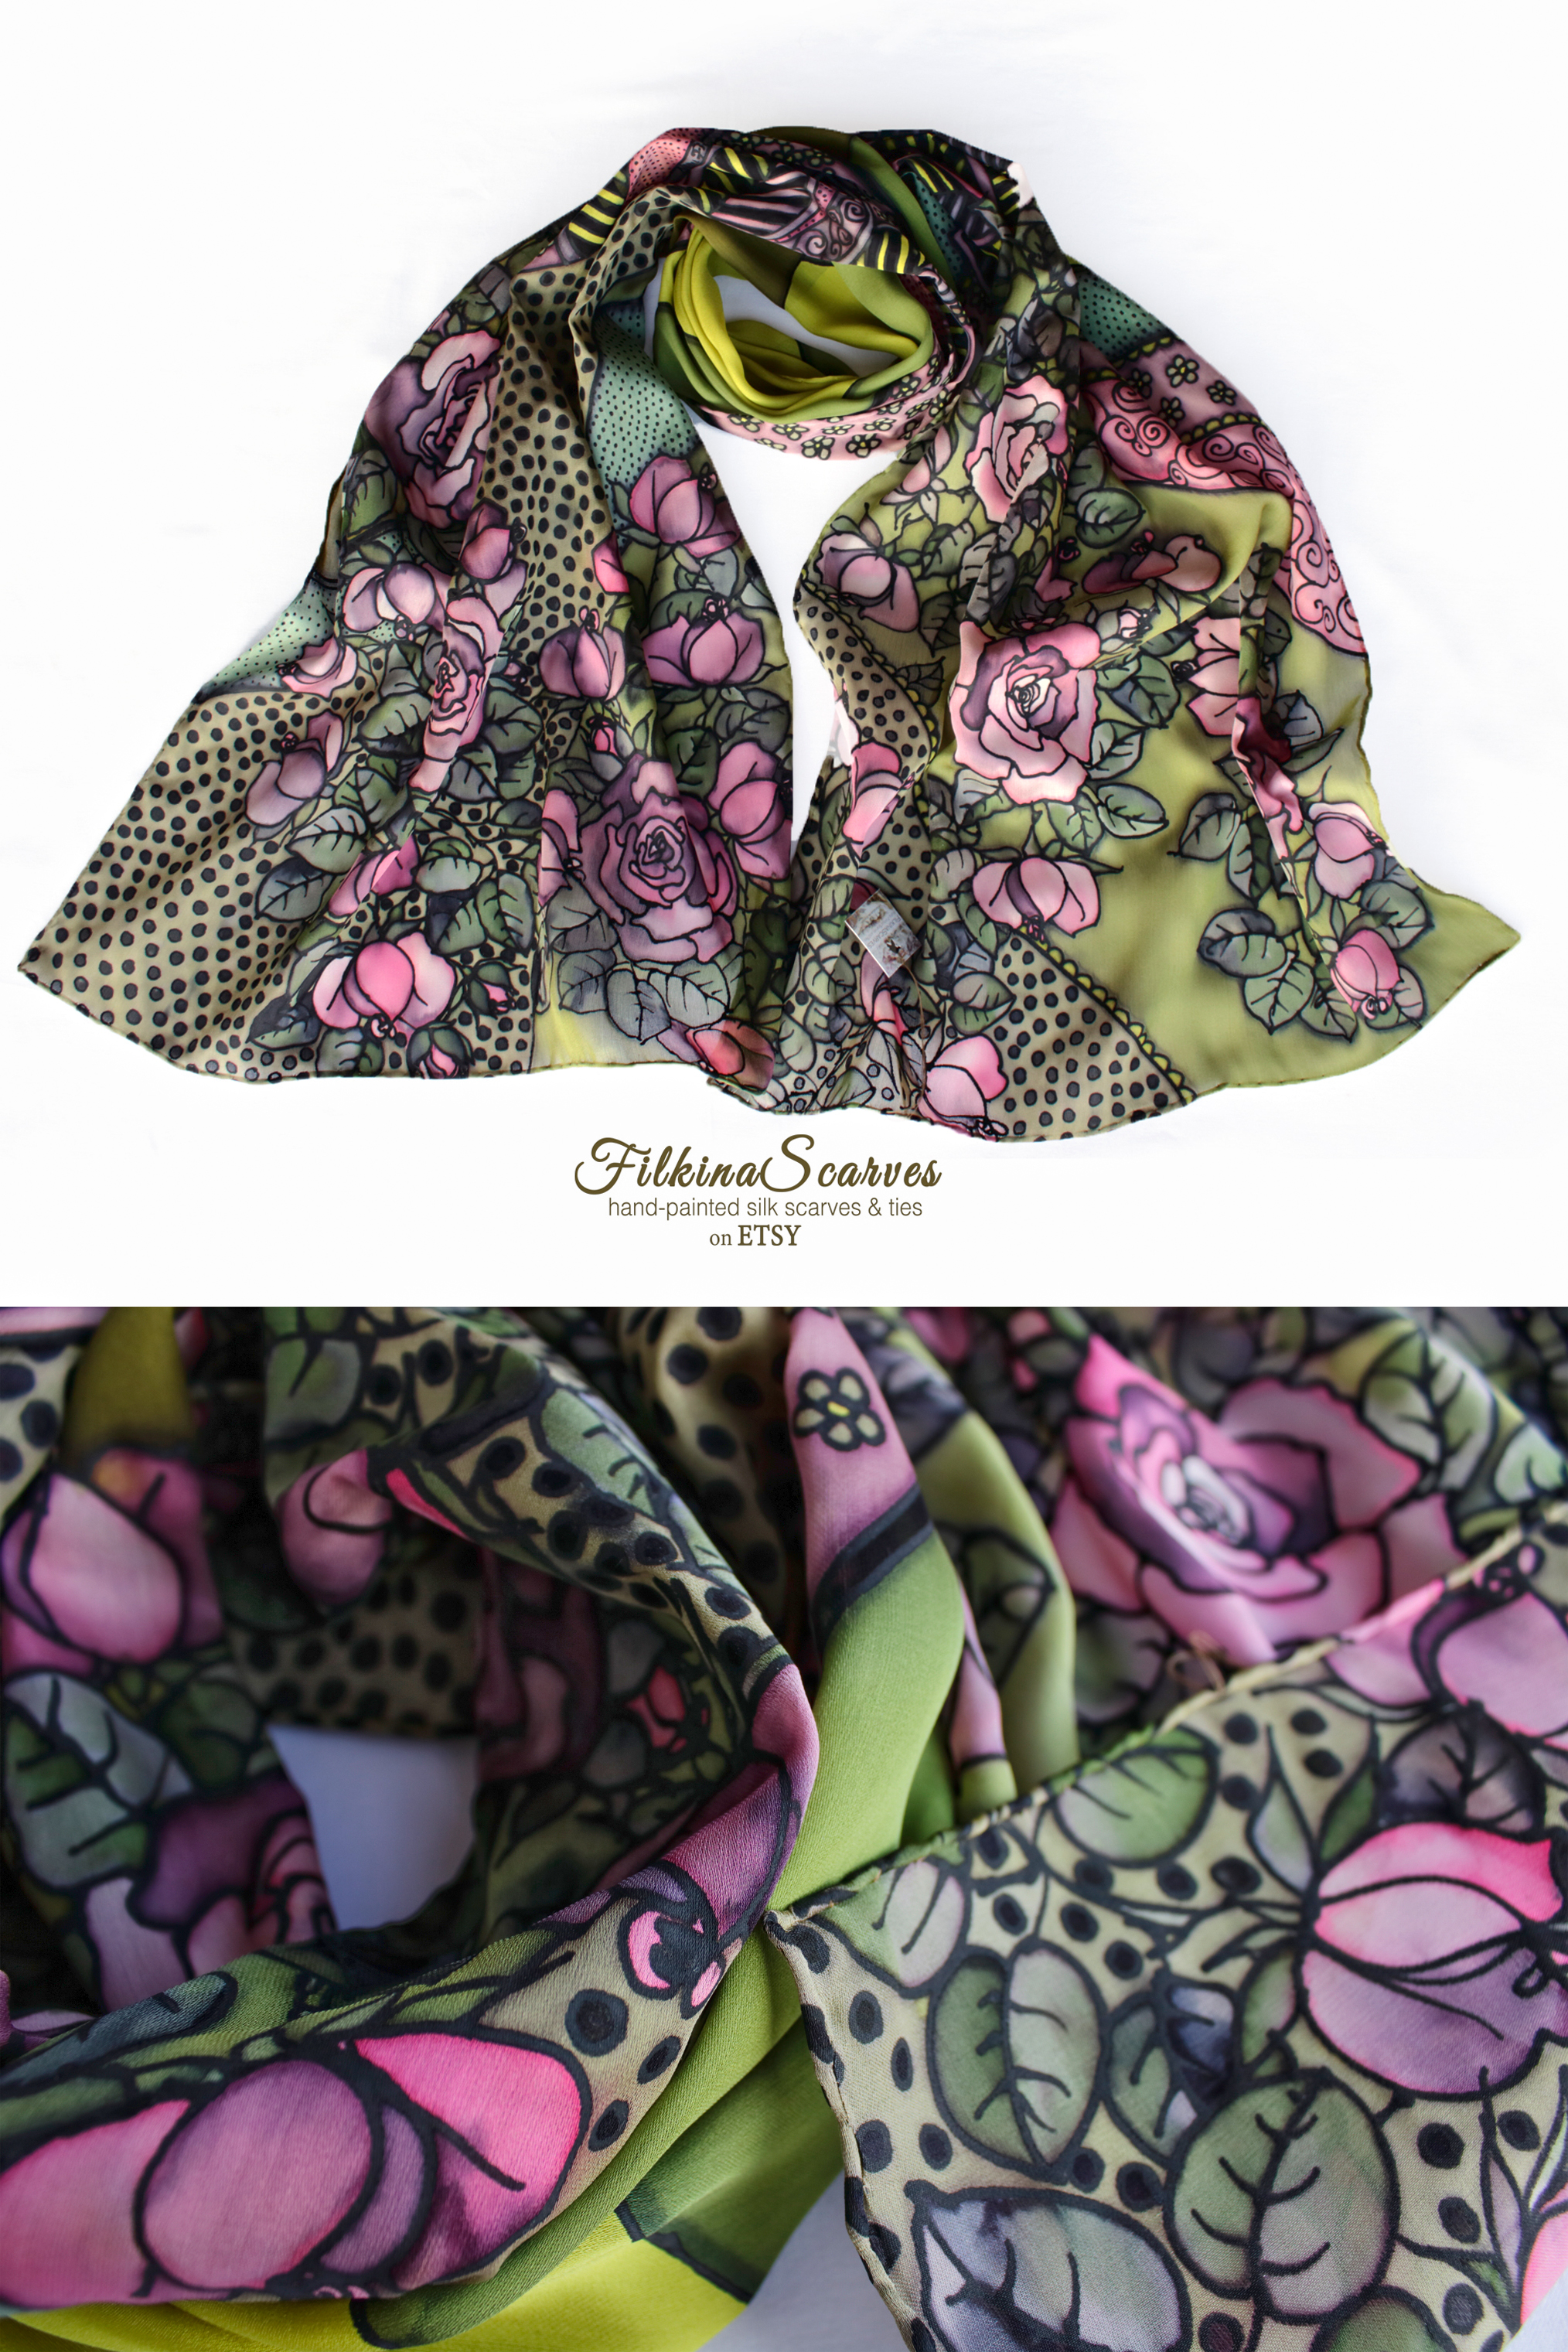 Chartreuse silk scarf with Roses HAND-PAINTED green chiffon shawl. Birthday gift for her. Mom from daughter unique gifts #chartreuse #scarf #womensfashion #giftforher #painted #roses #chiffon #FilkinaScarves #etsy #womens #accessories